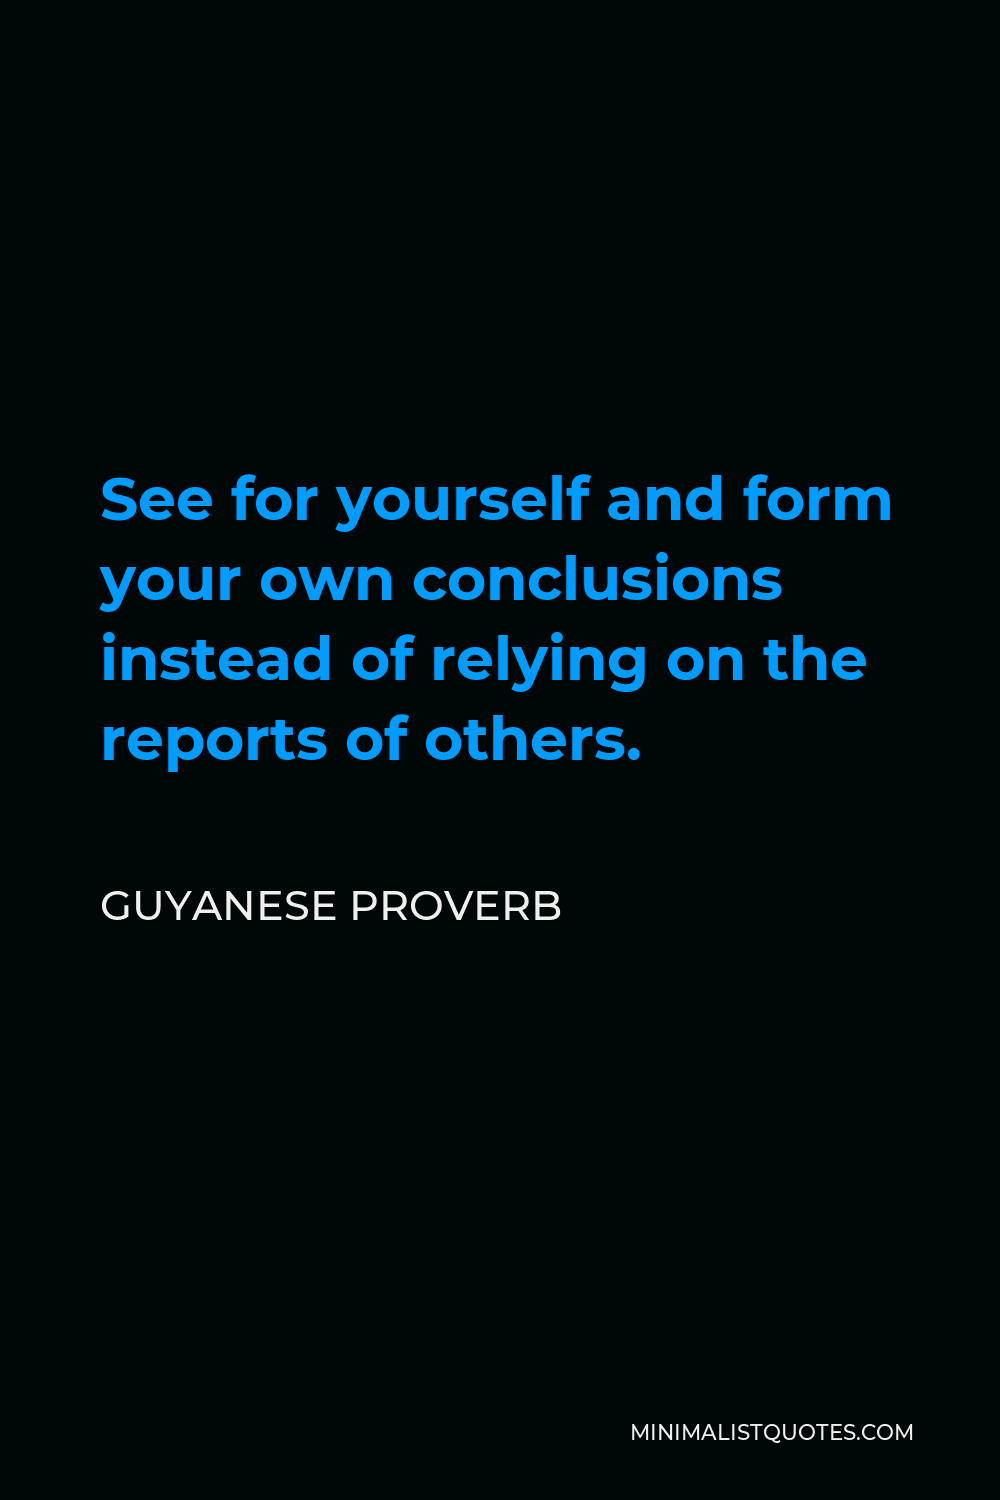 Guyanese Proverb Quote - See for yourself and form your own conclusions instead of relying on the reports of others.